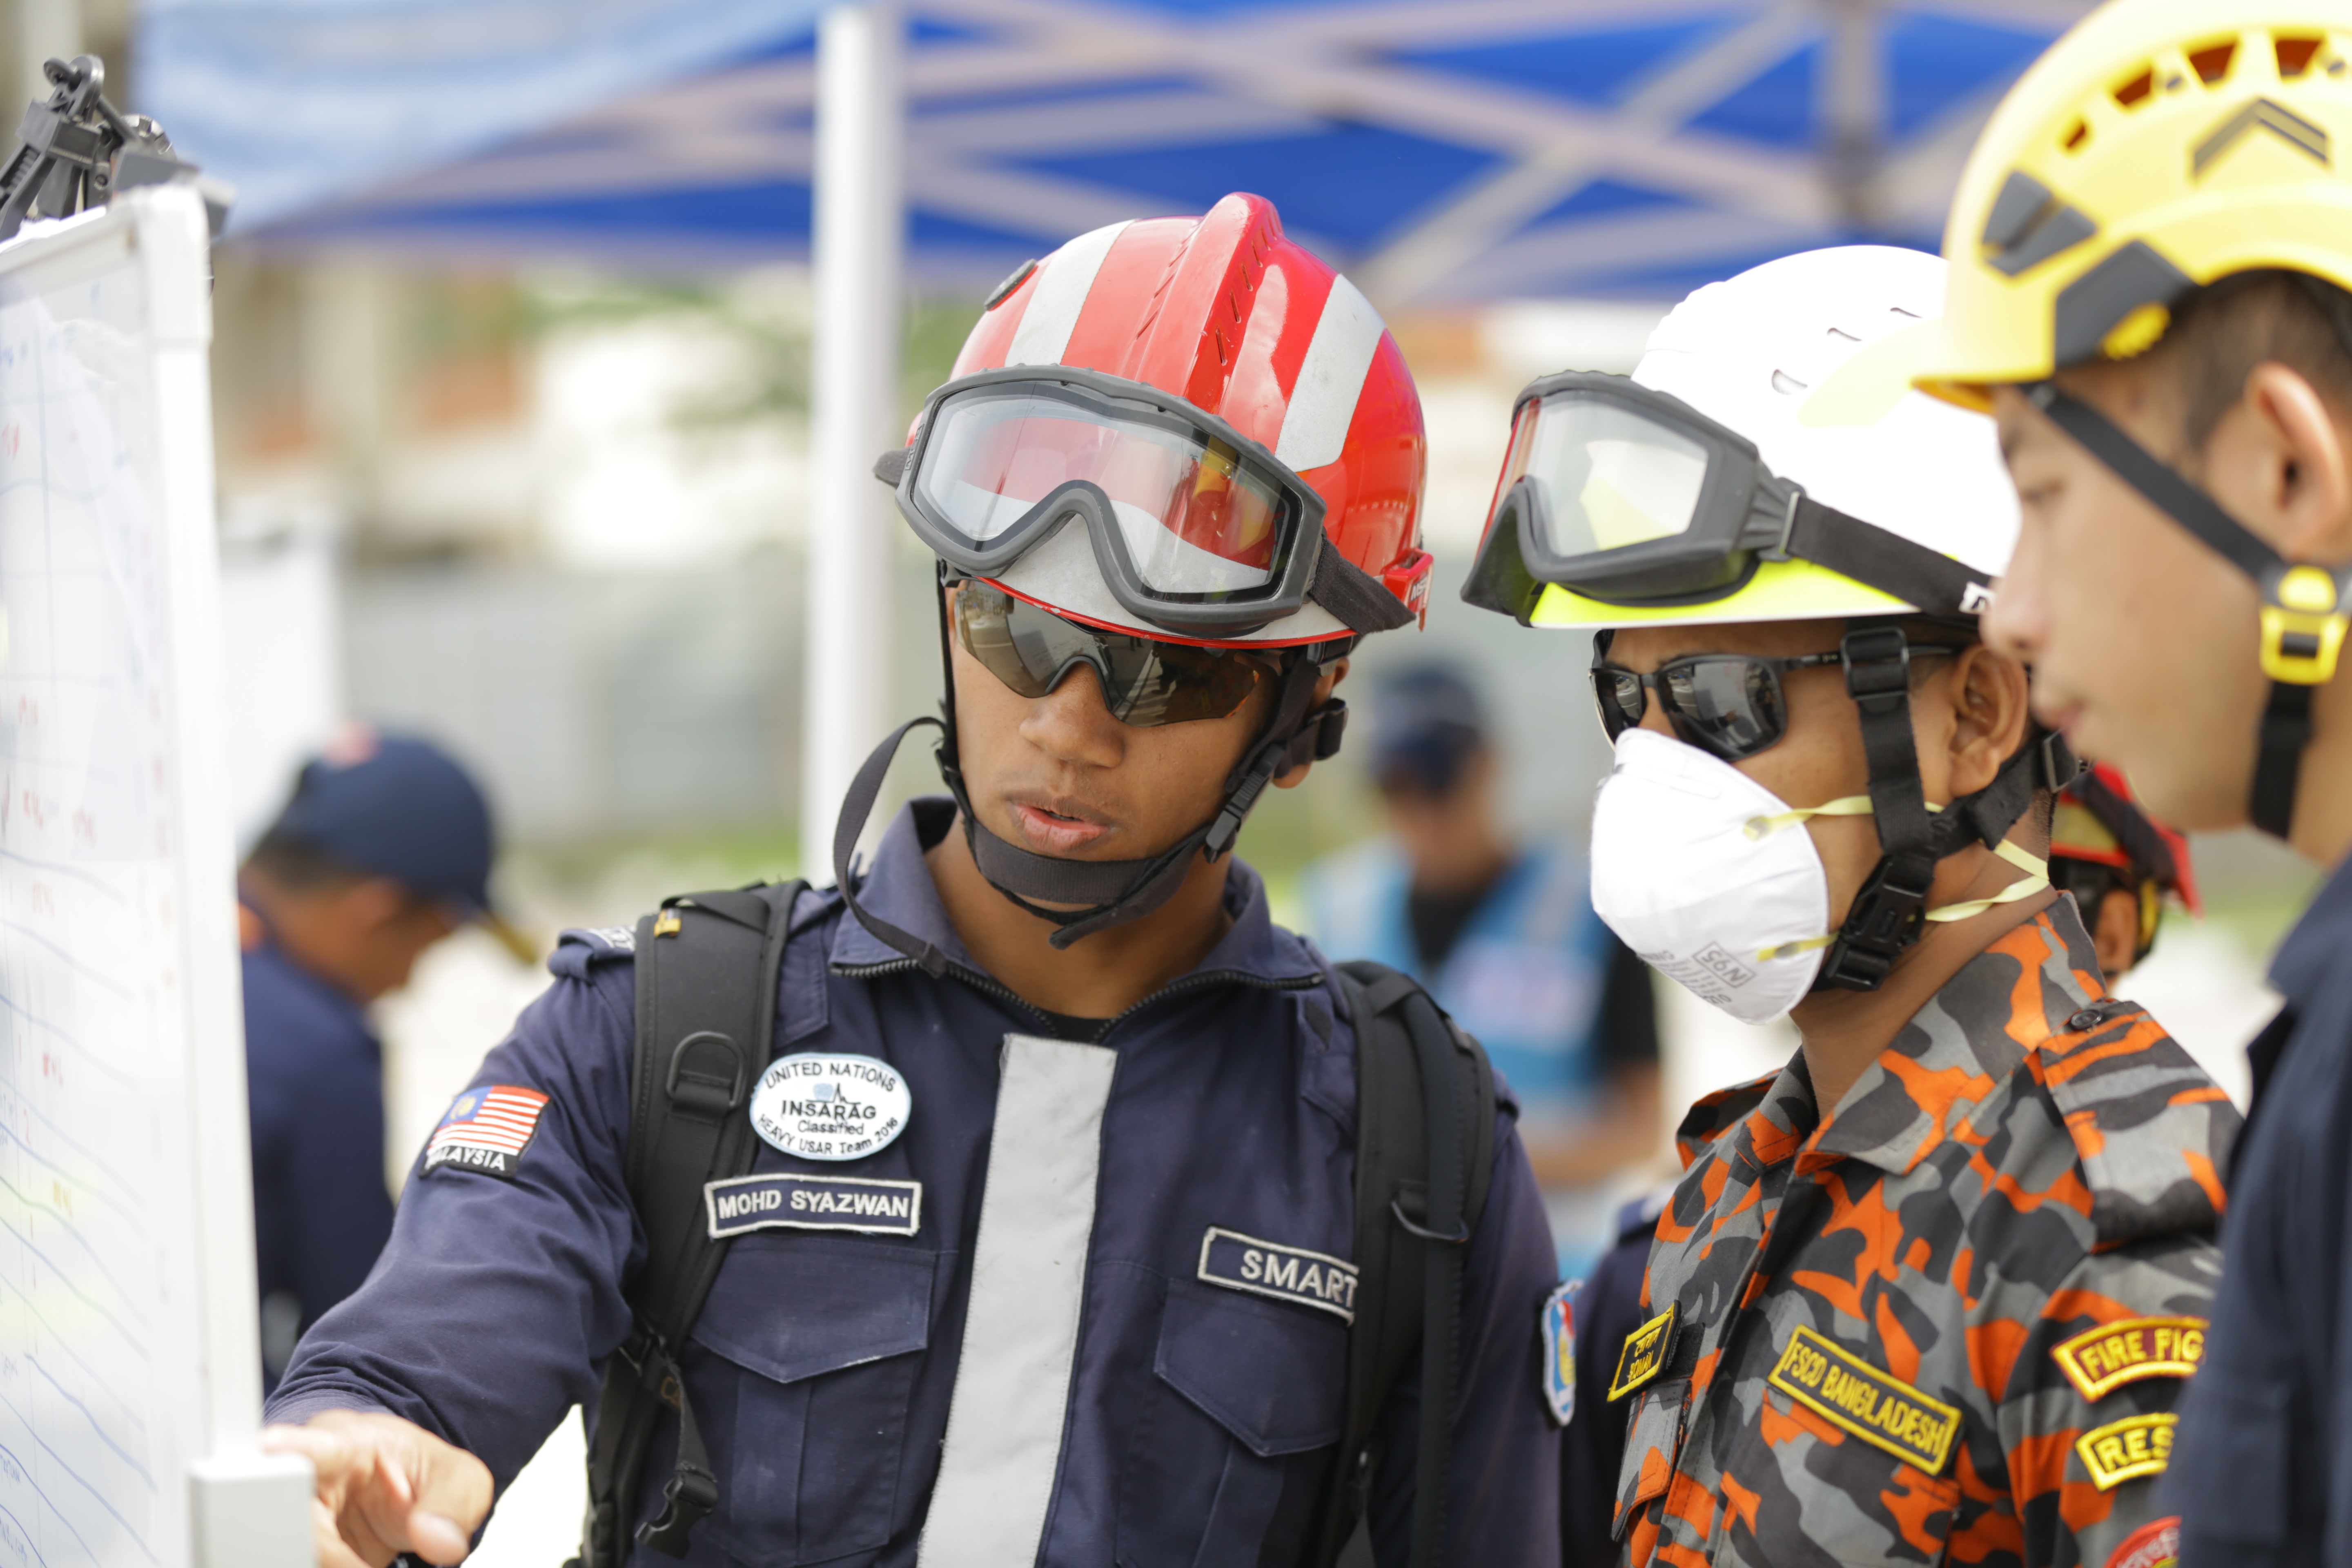 One of the officers from Malaysia's SMART team with other teams from other countries. Img from Singapore's Civil Defence Force